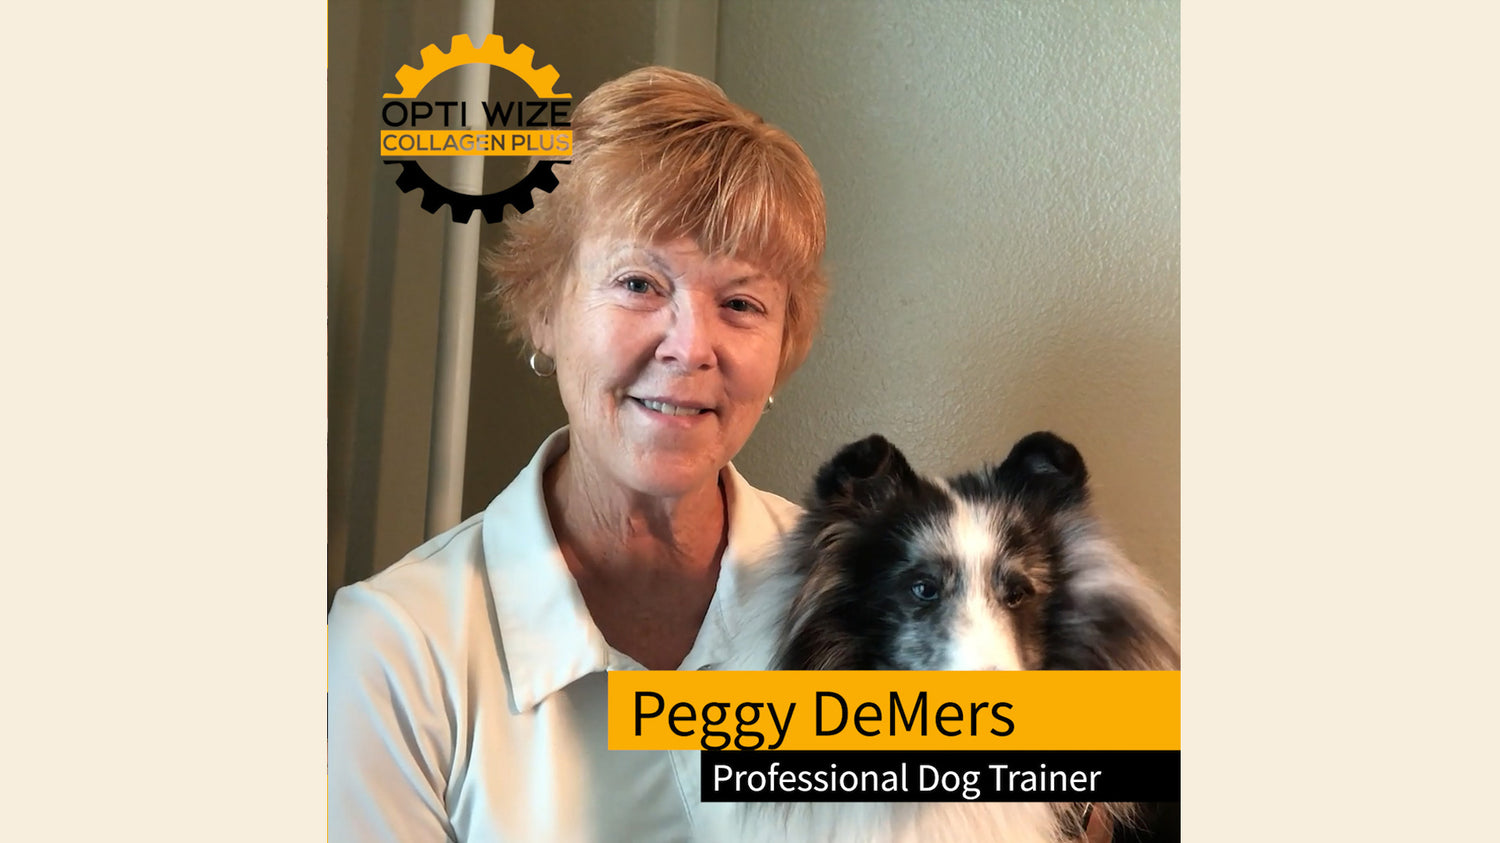 <p>Peggy DeMers has been showing in agility, obedience, rally, conformation and herding for over 20 years.  She has trained her dogs through multiple High in Trial wins from the novice classes, agility champions (MaCH and Bronze ADCH), and group 1-4 placements and Grand Champions in conformation. </p>